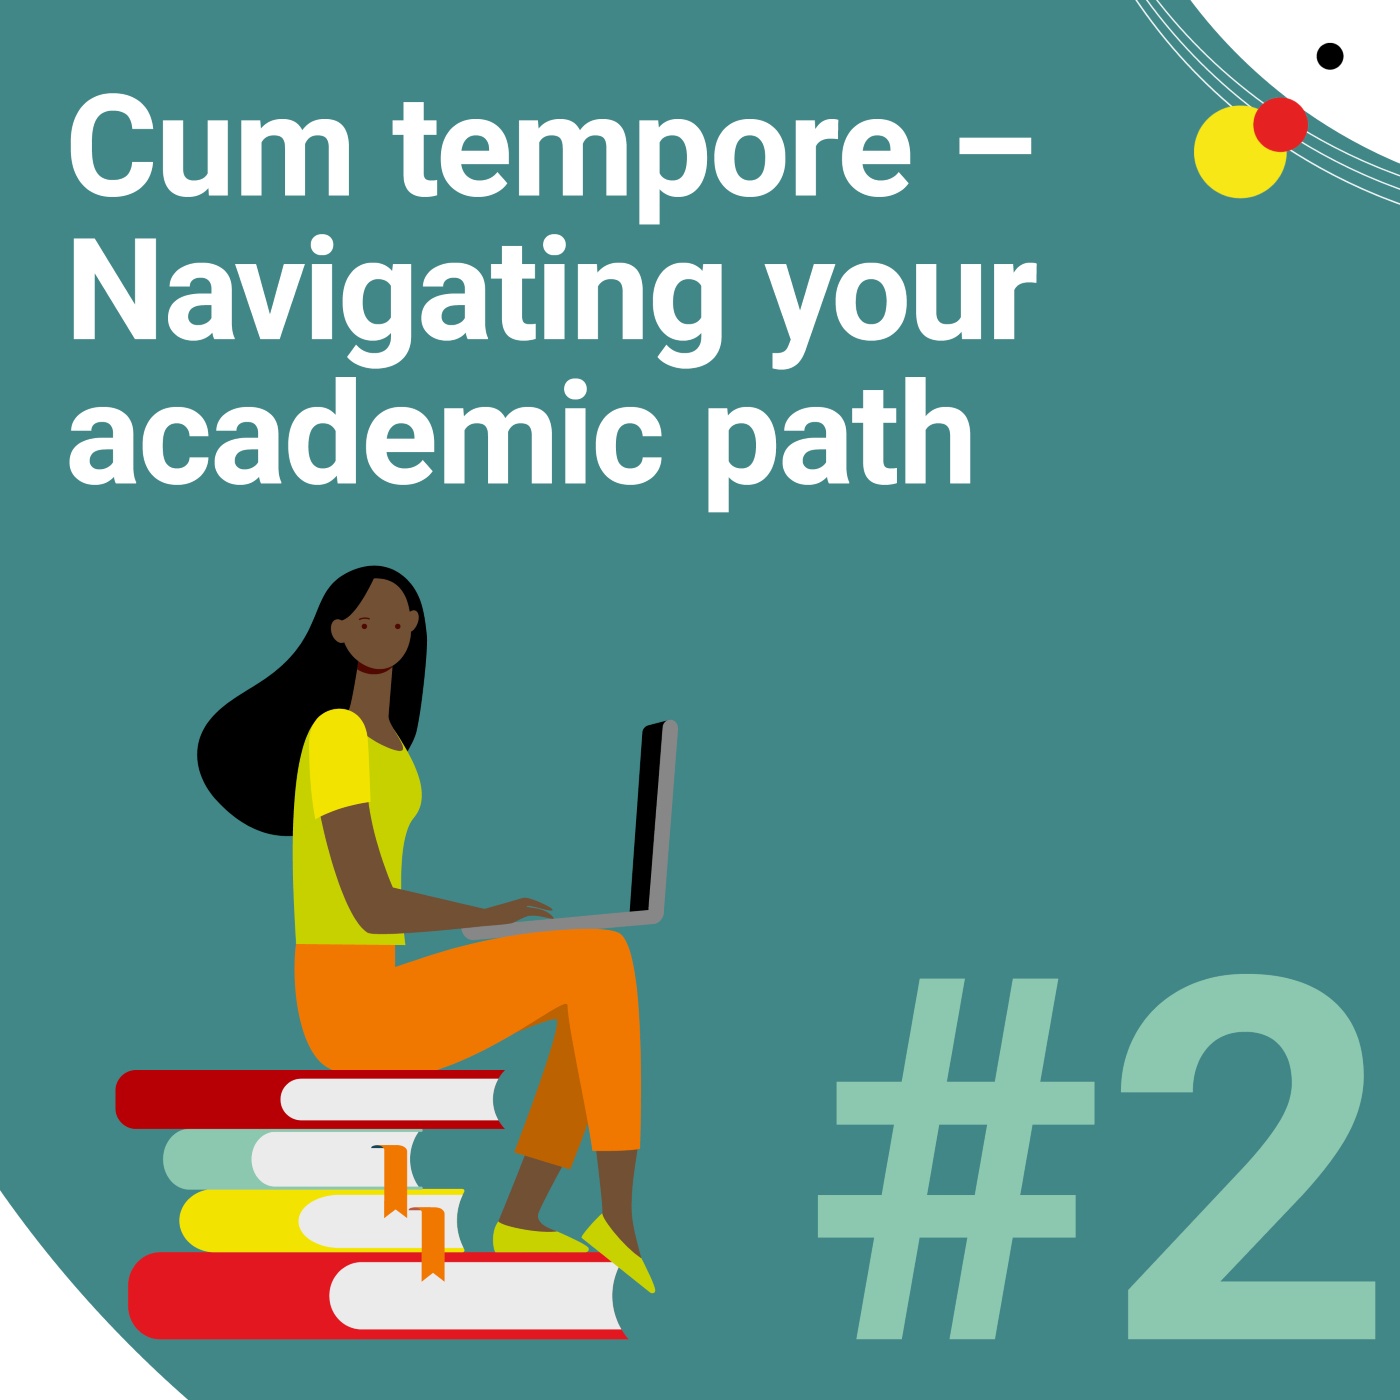 #2 Cum tempore - Navigating your academic path in Germany